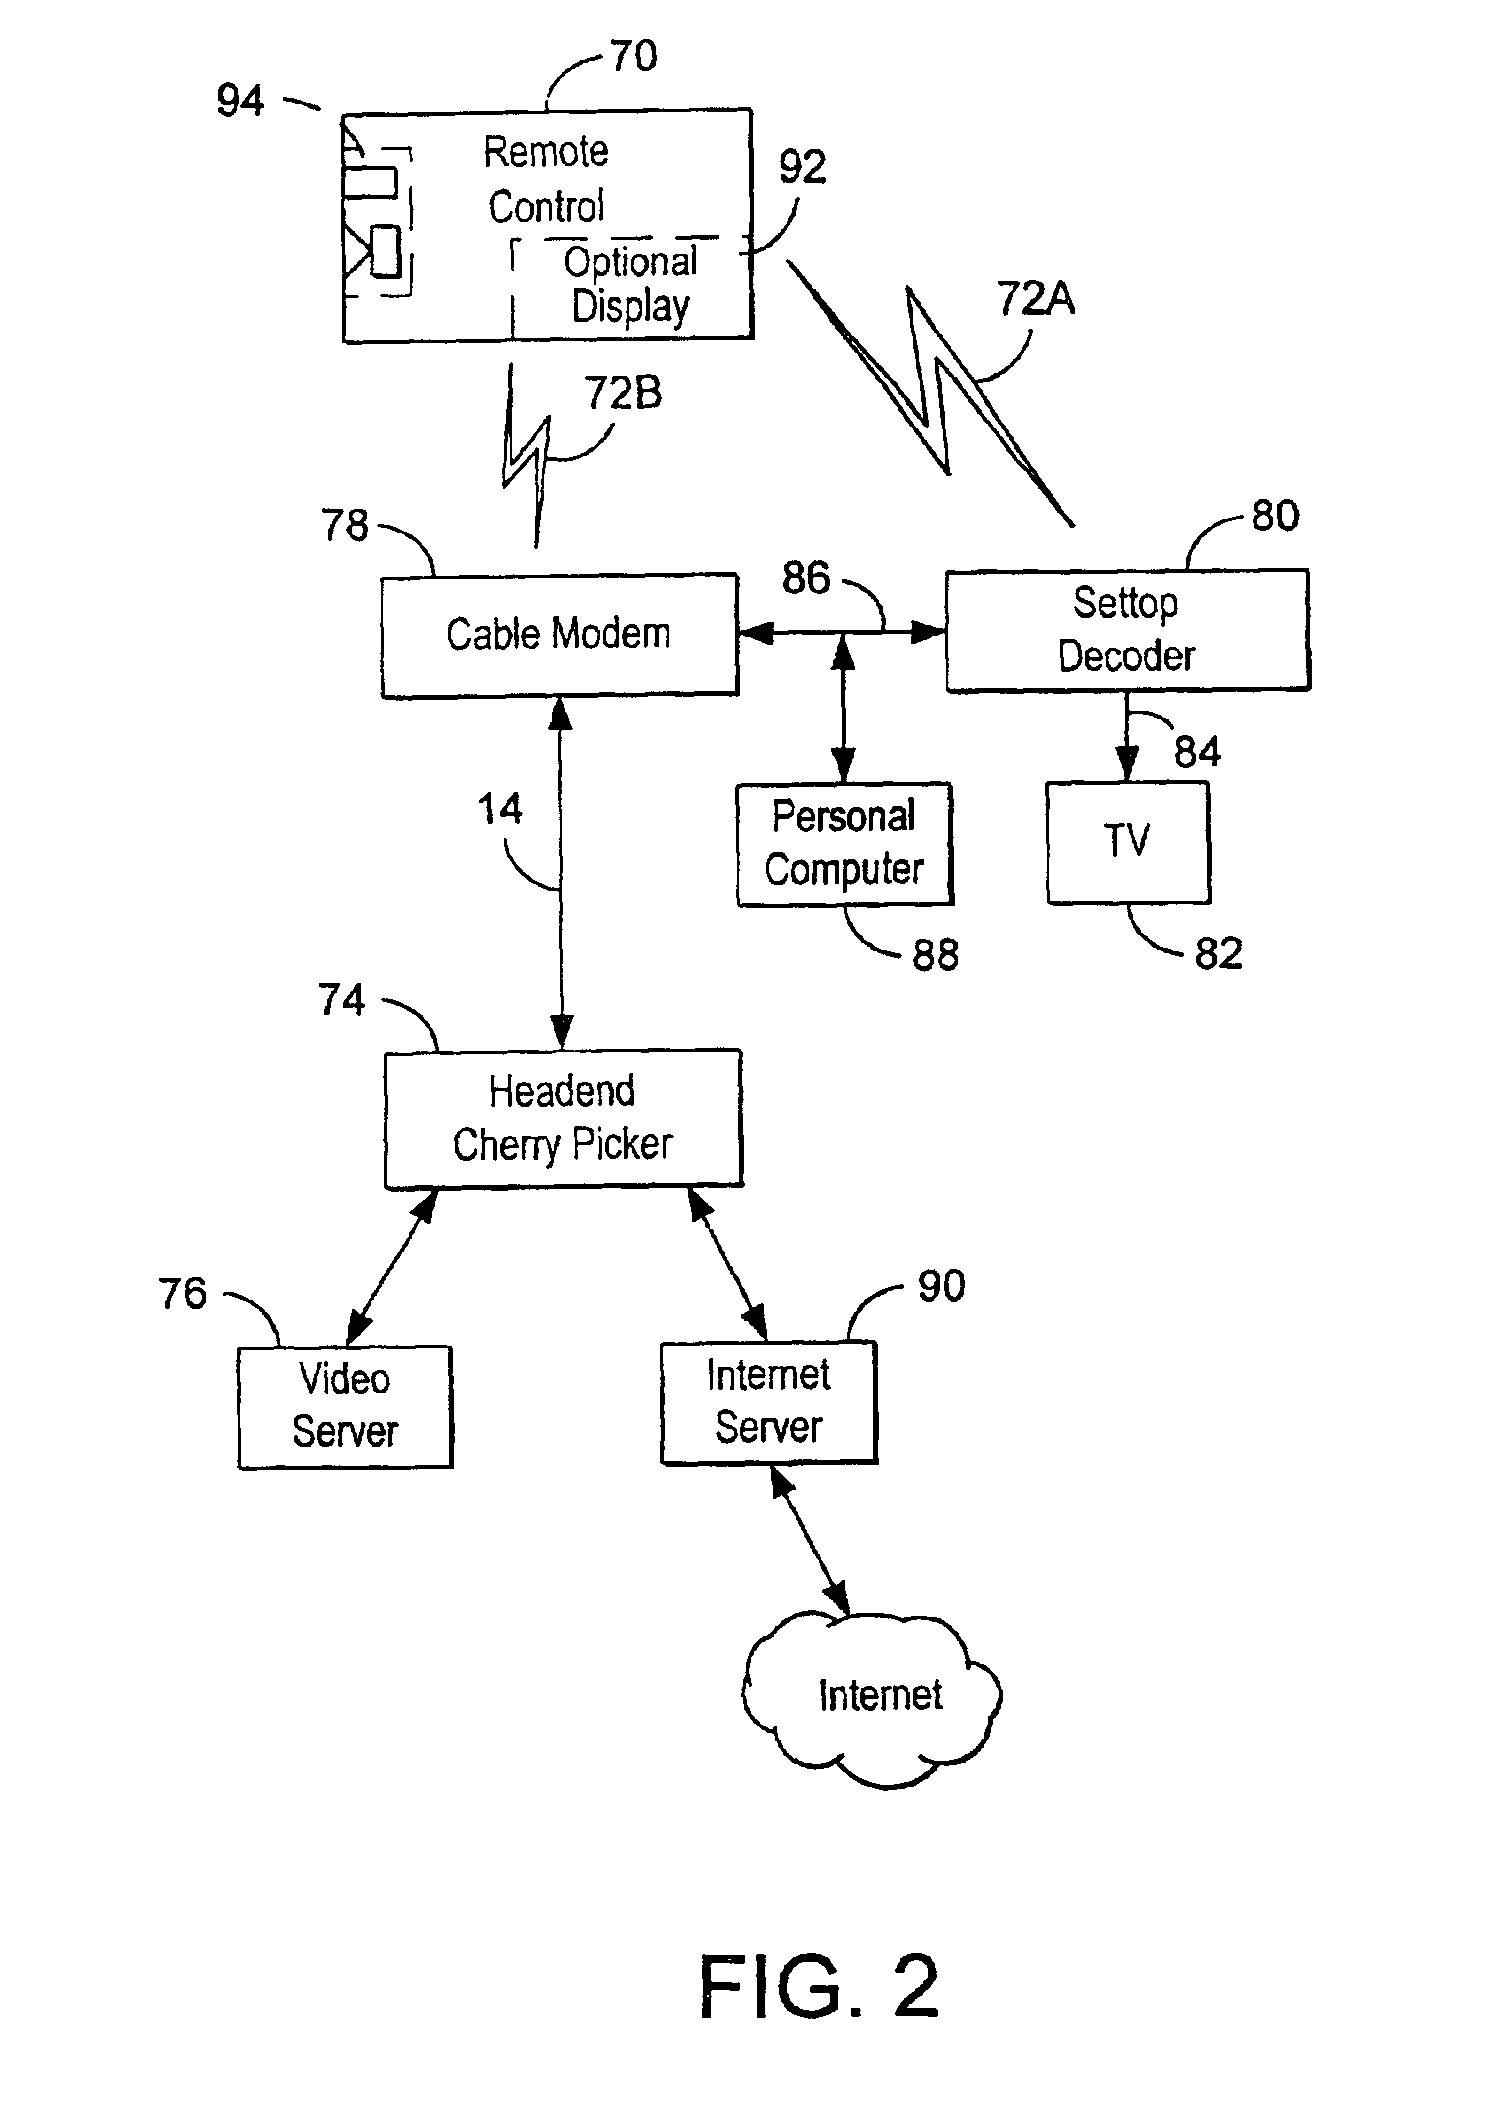 Remote control for wireless control of system and displaying of compressed video on a display on the remote